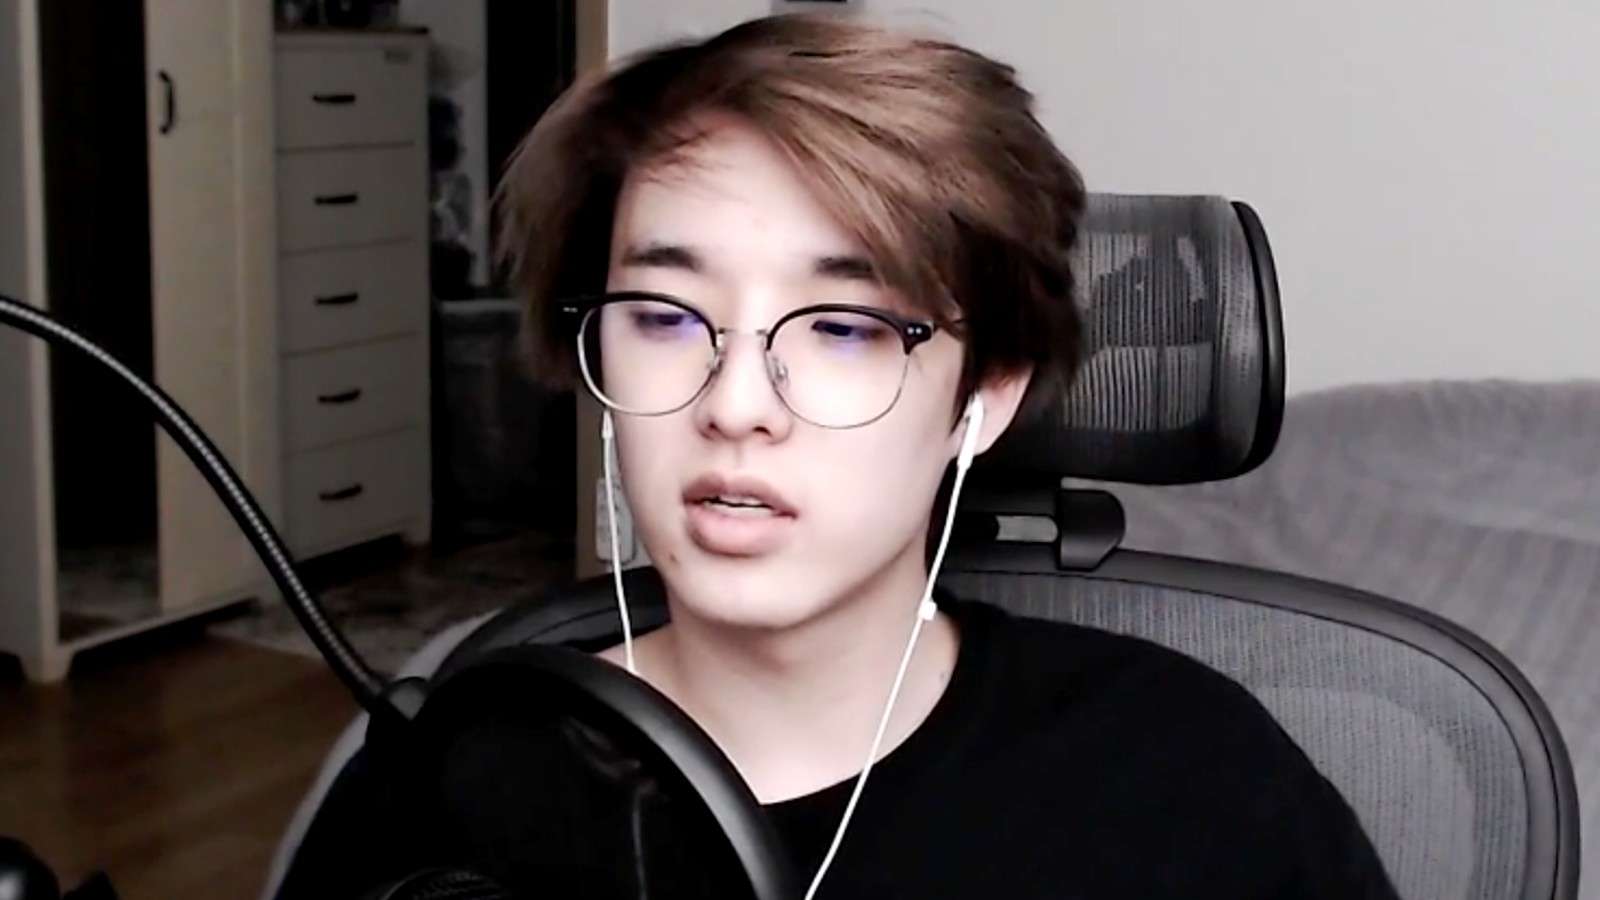 Day6's Jae streaming on Twitch